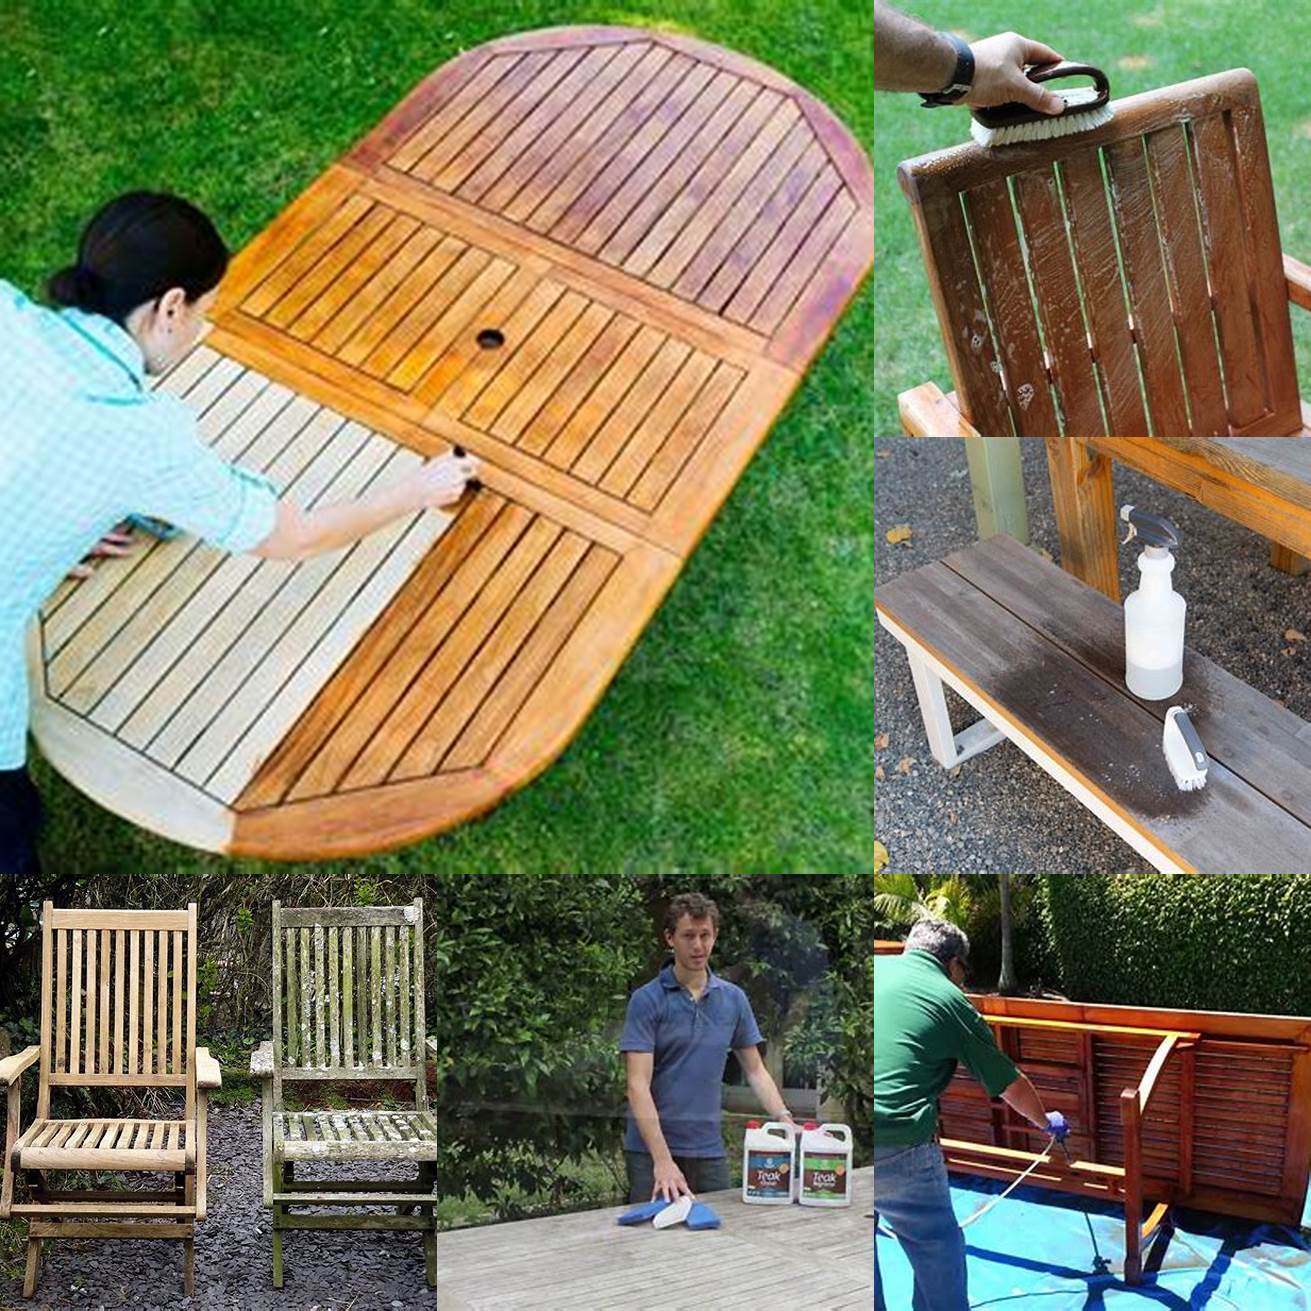 A picture of a person cleaning teak deck furniture